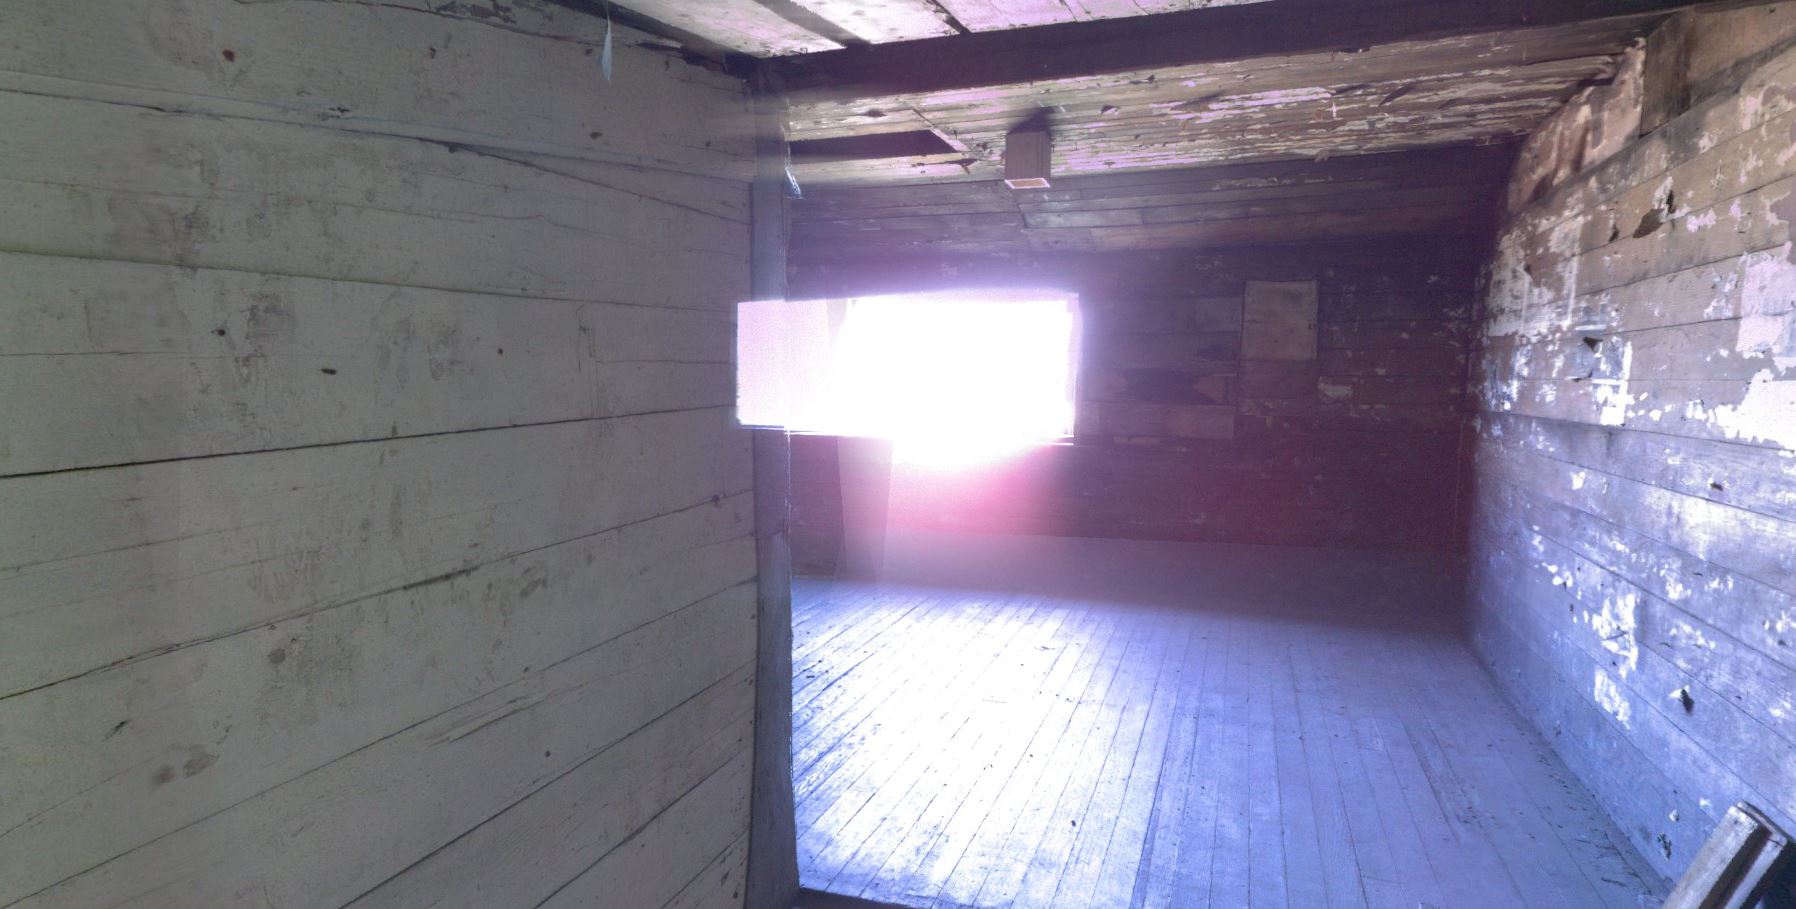 Panoramic view of scanning location 4 of the interior of Small House no.11 on Herschel Island